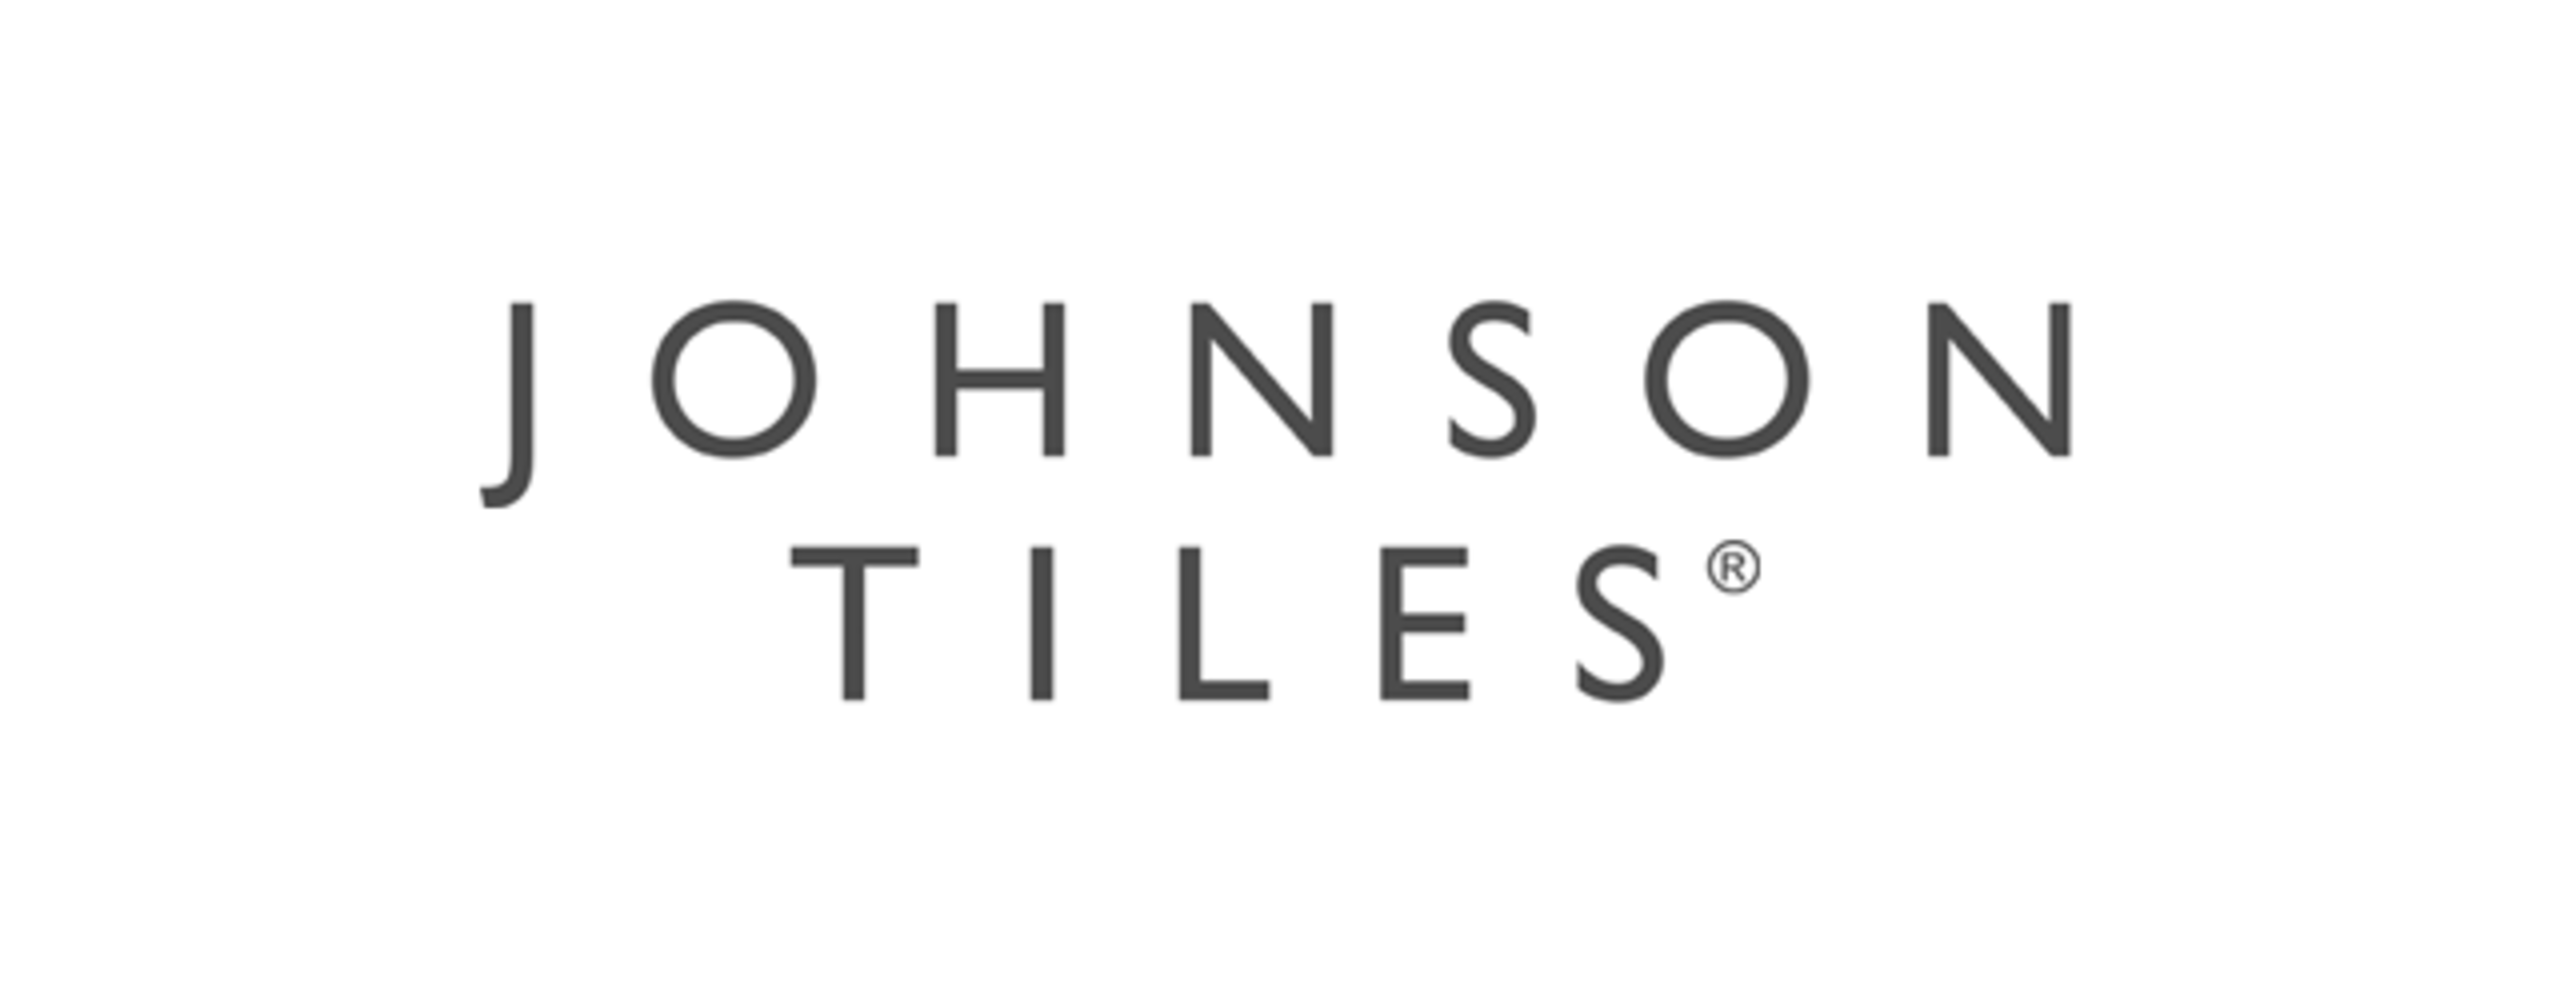 Pallets and Packs of Johnsons Tiles